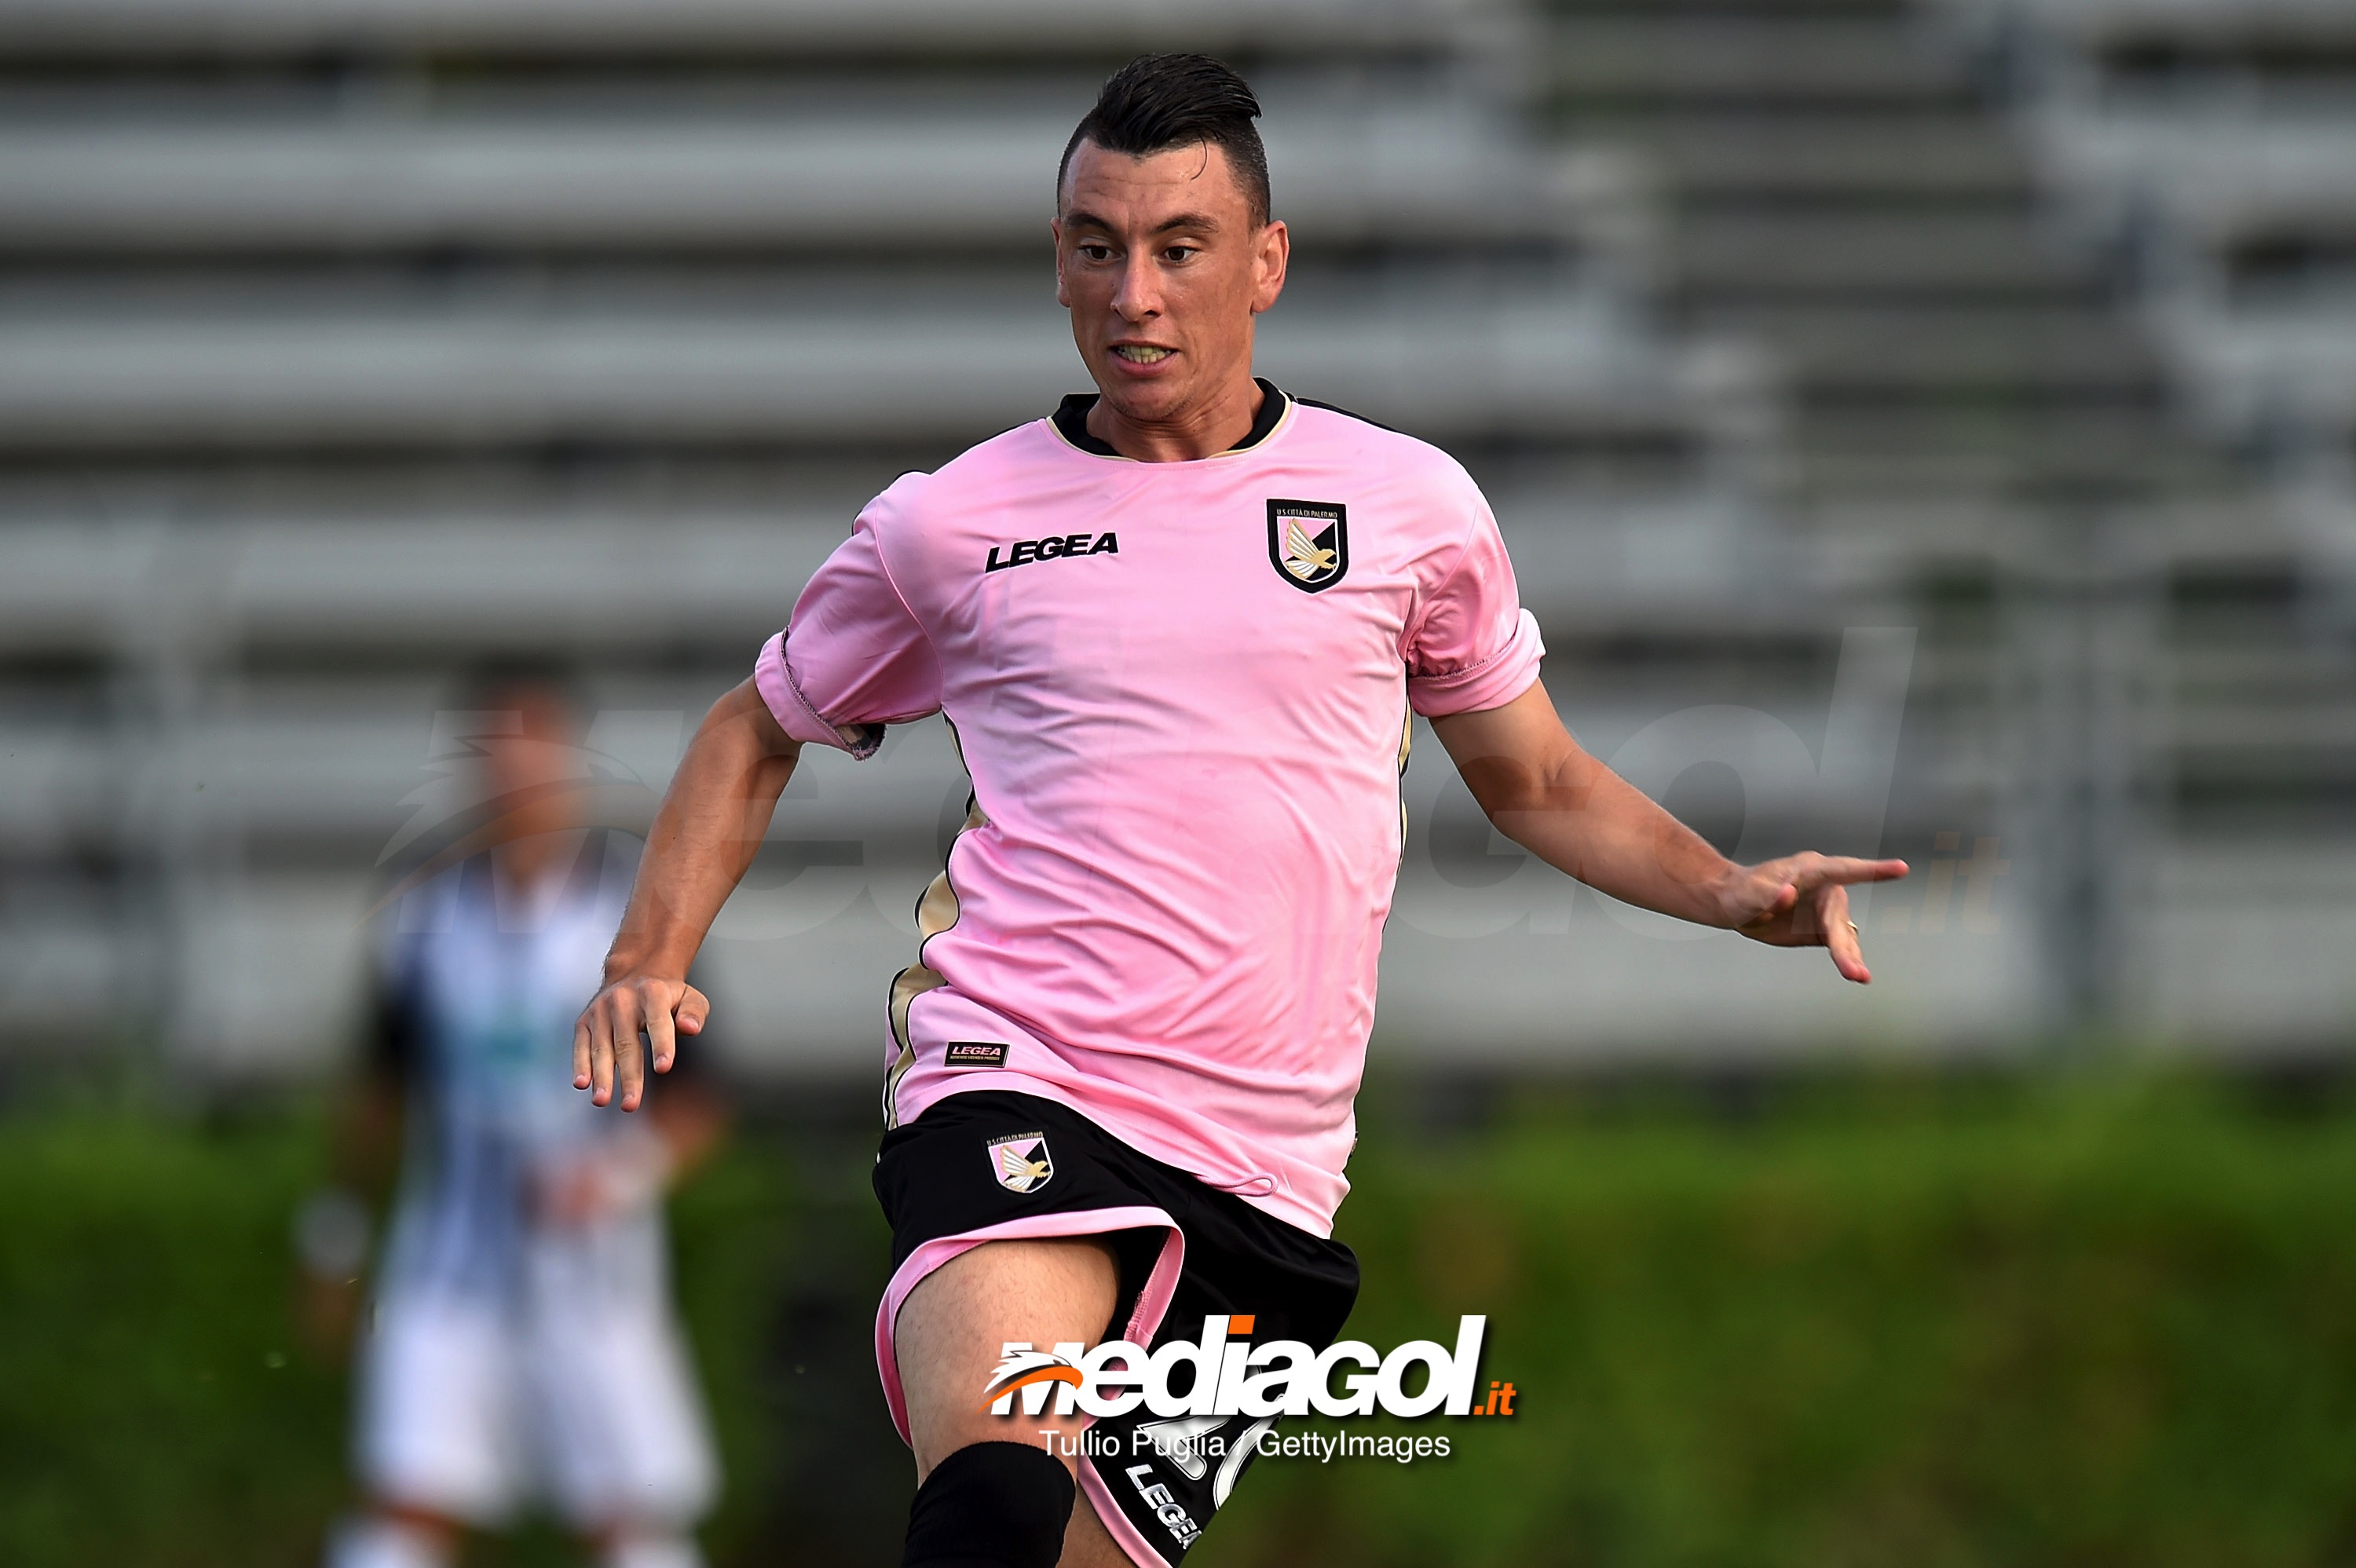 PALERMO, ITALY - AUGUST 18:  Cesar Falletti of Palermo in action during the pre-season friendly match between US Citta' di Palermo and Sicula Leonzio at Carmelo Onorato training center on August 18, 2018 in Palermo, Italy.  (Photo by Tullio M. Puglia/Getty Images)